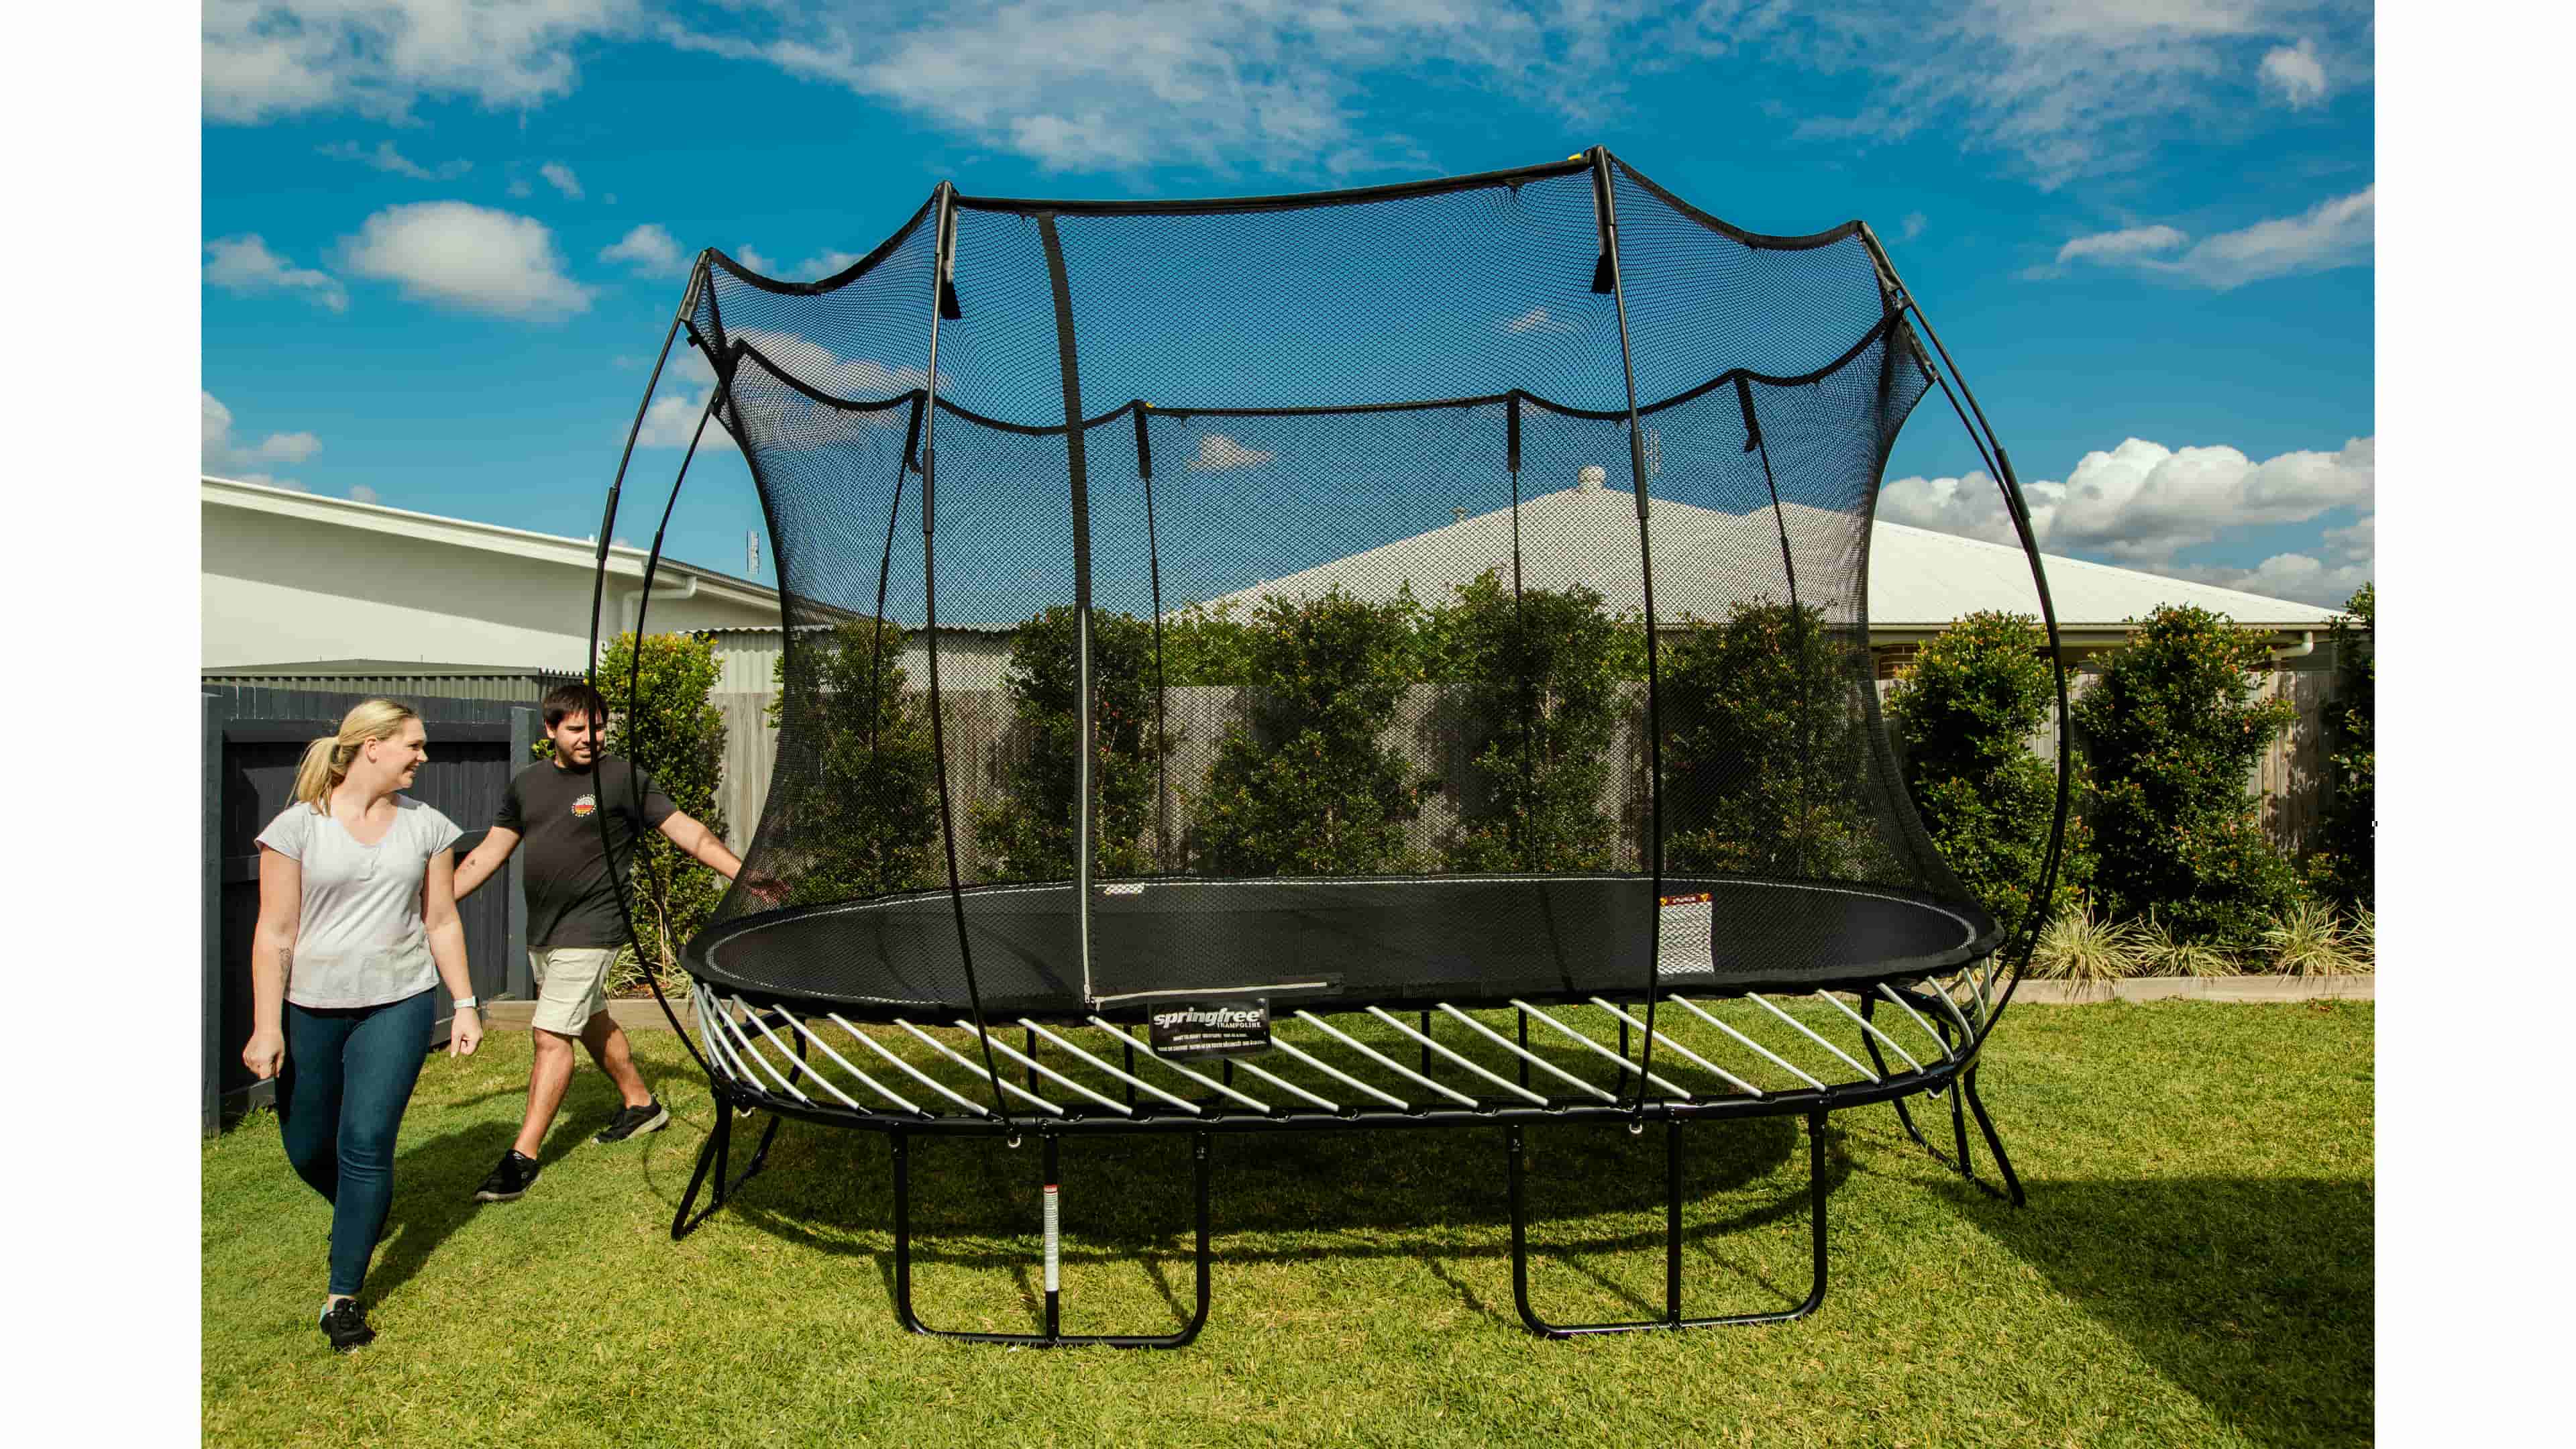 Should You Buy a Used Springfree Trampoline? | Pros & Cons 